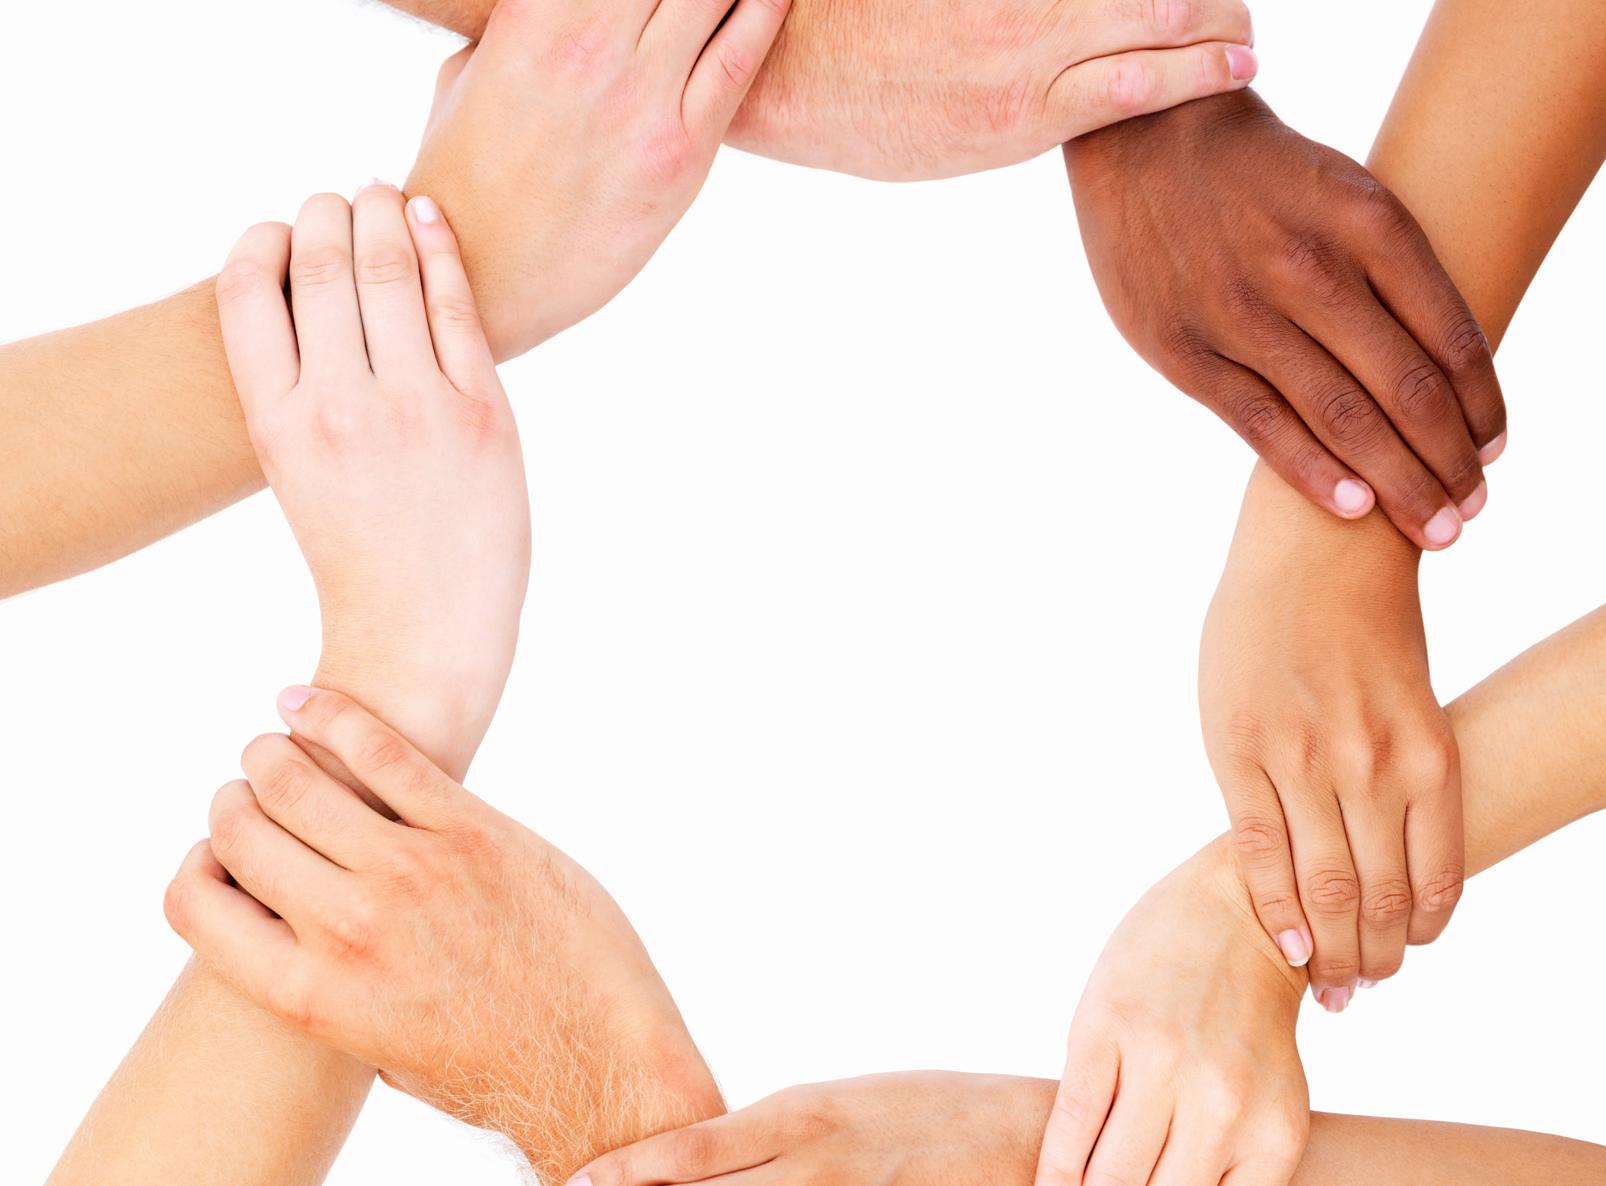 Hands showing unity